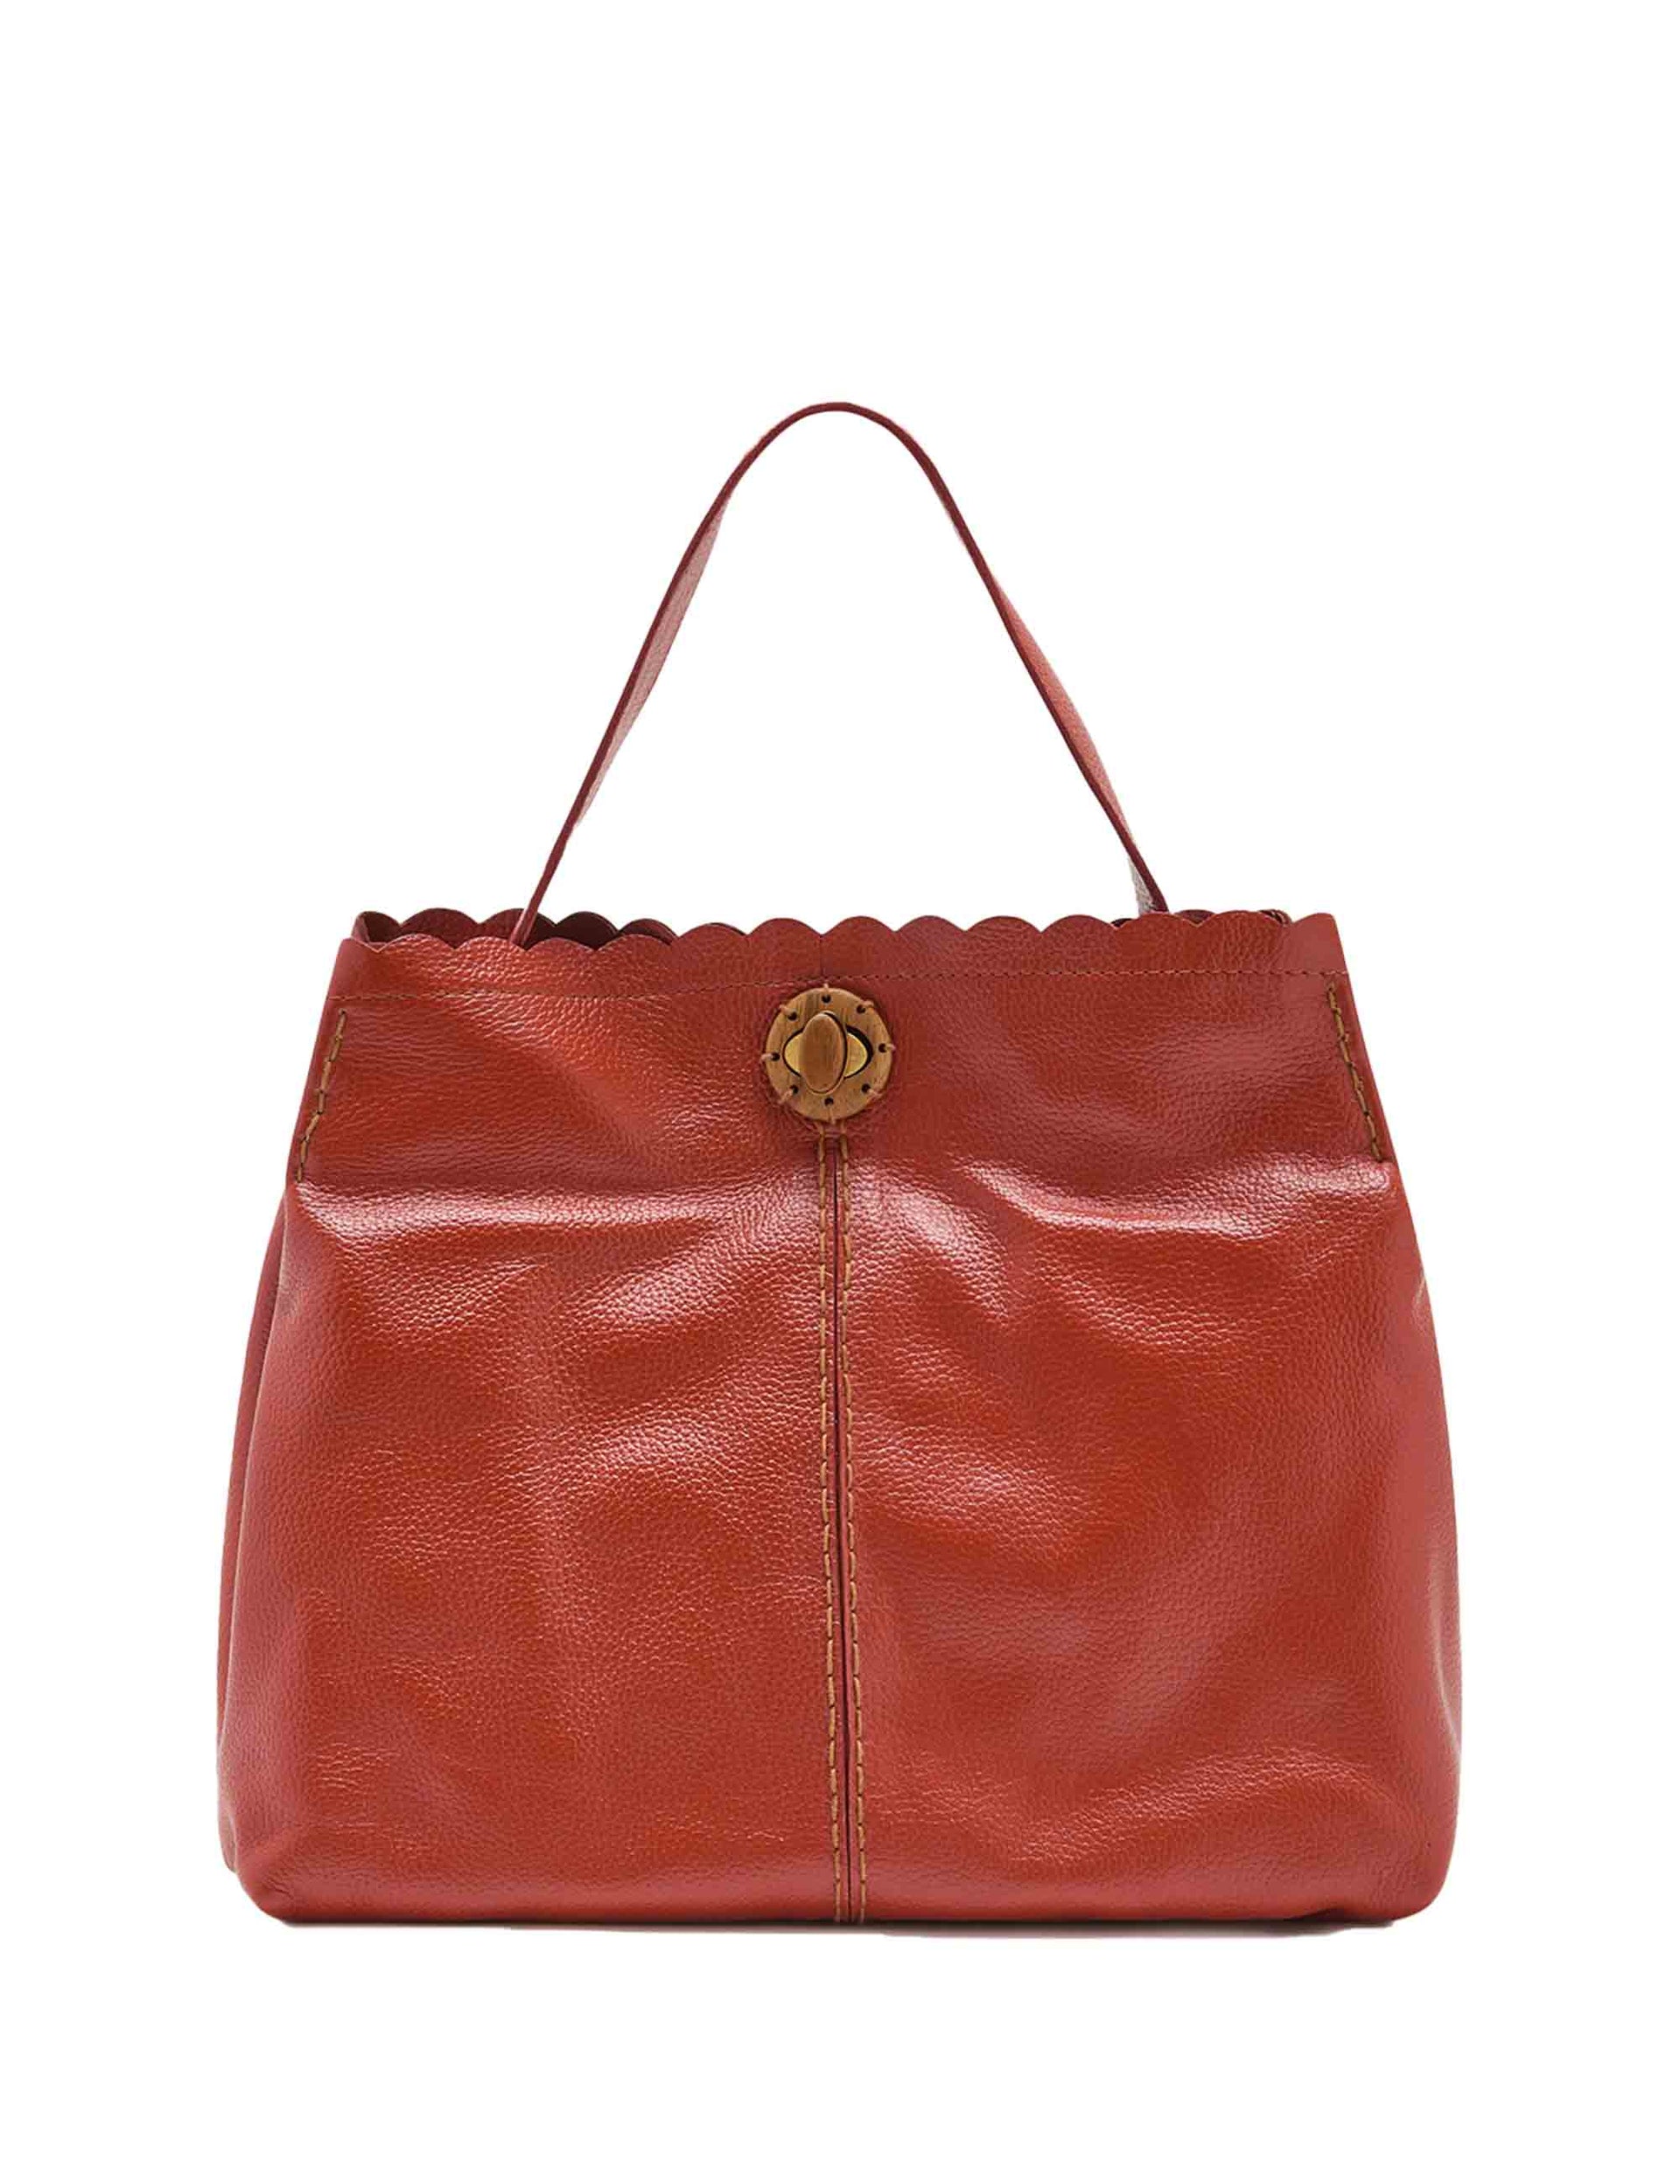 Text Tured women's shoulder bags in tan leather